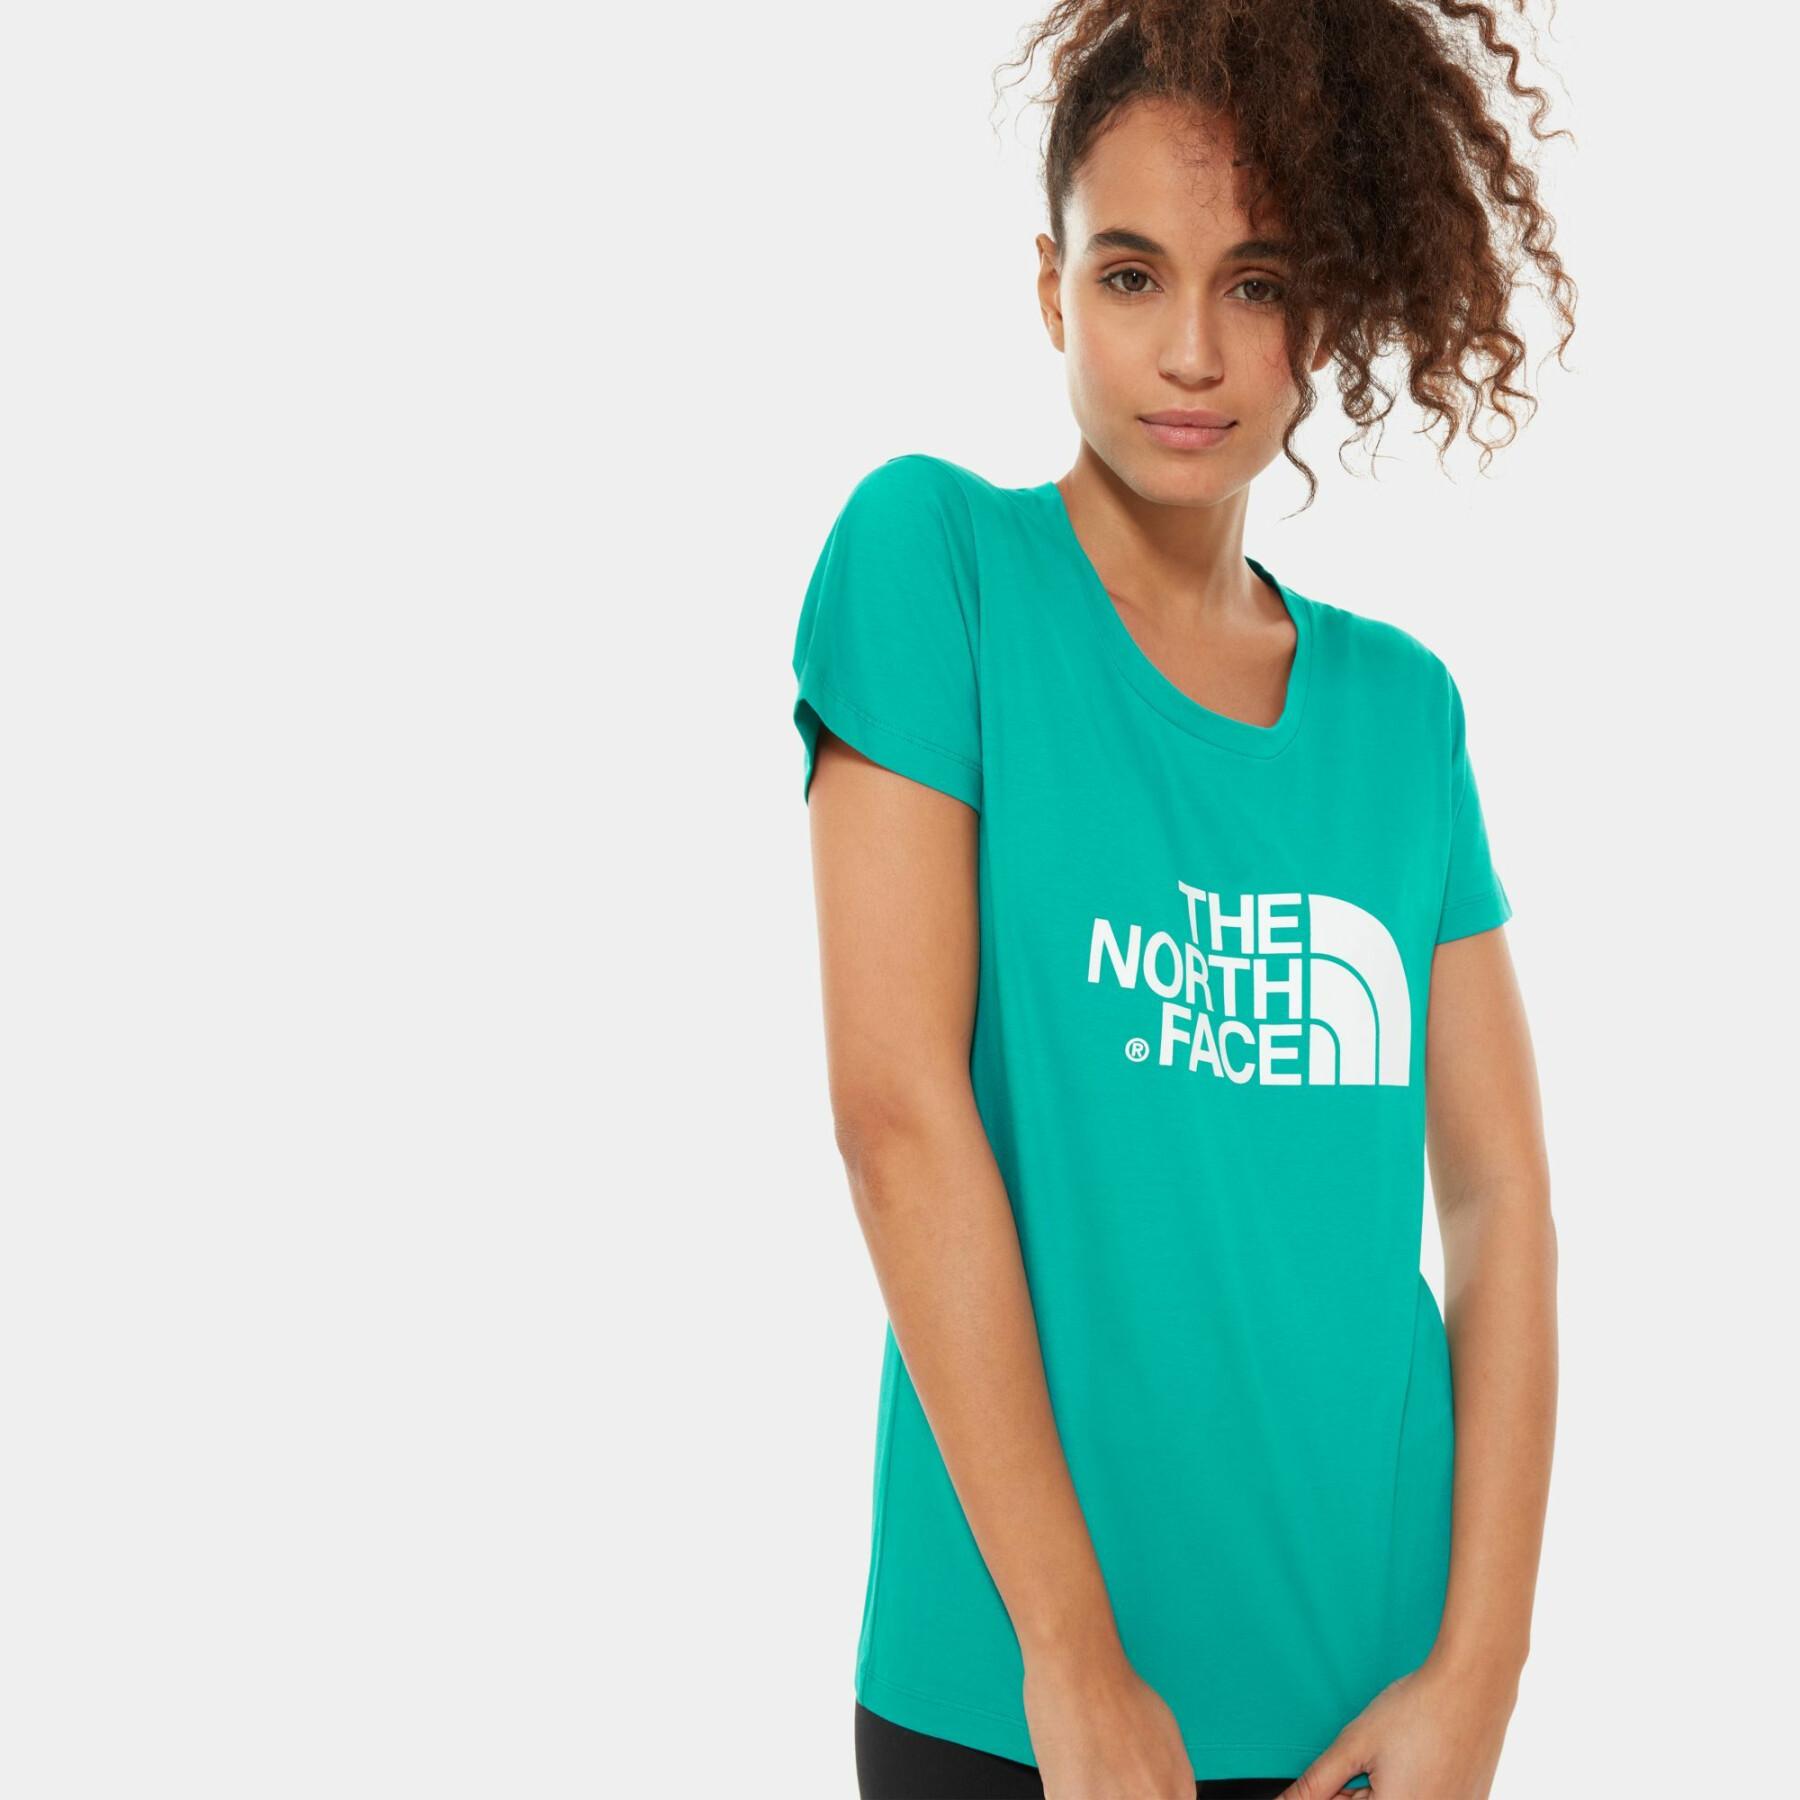 Women's T-shirt The North Face Easy